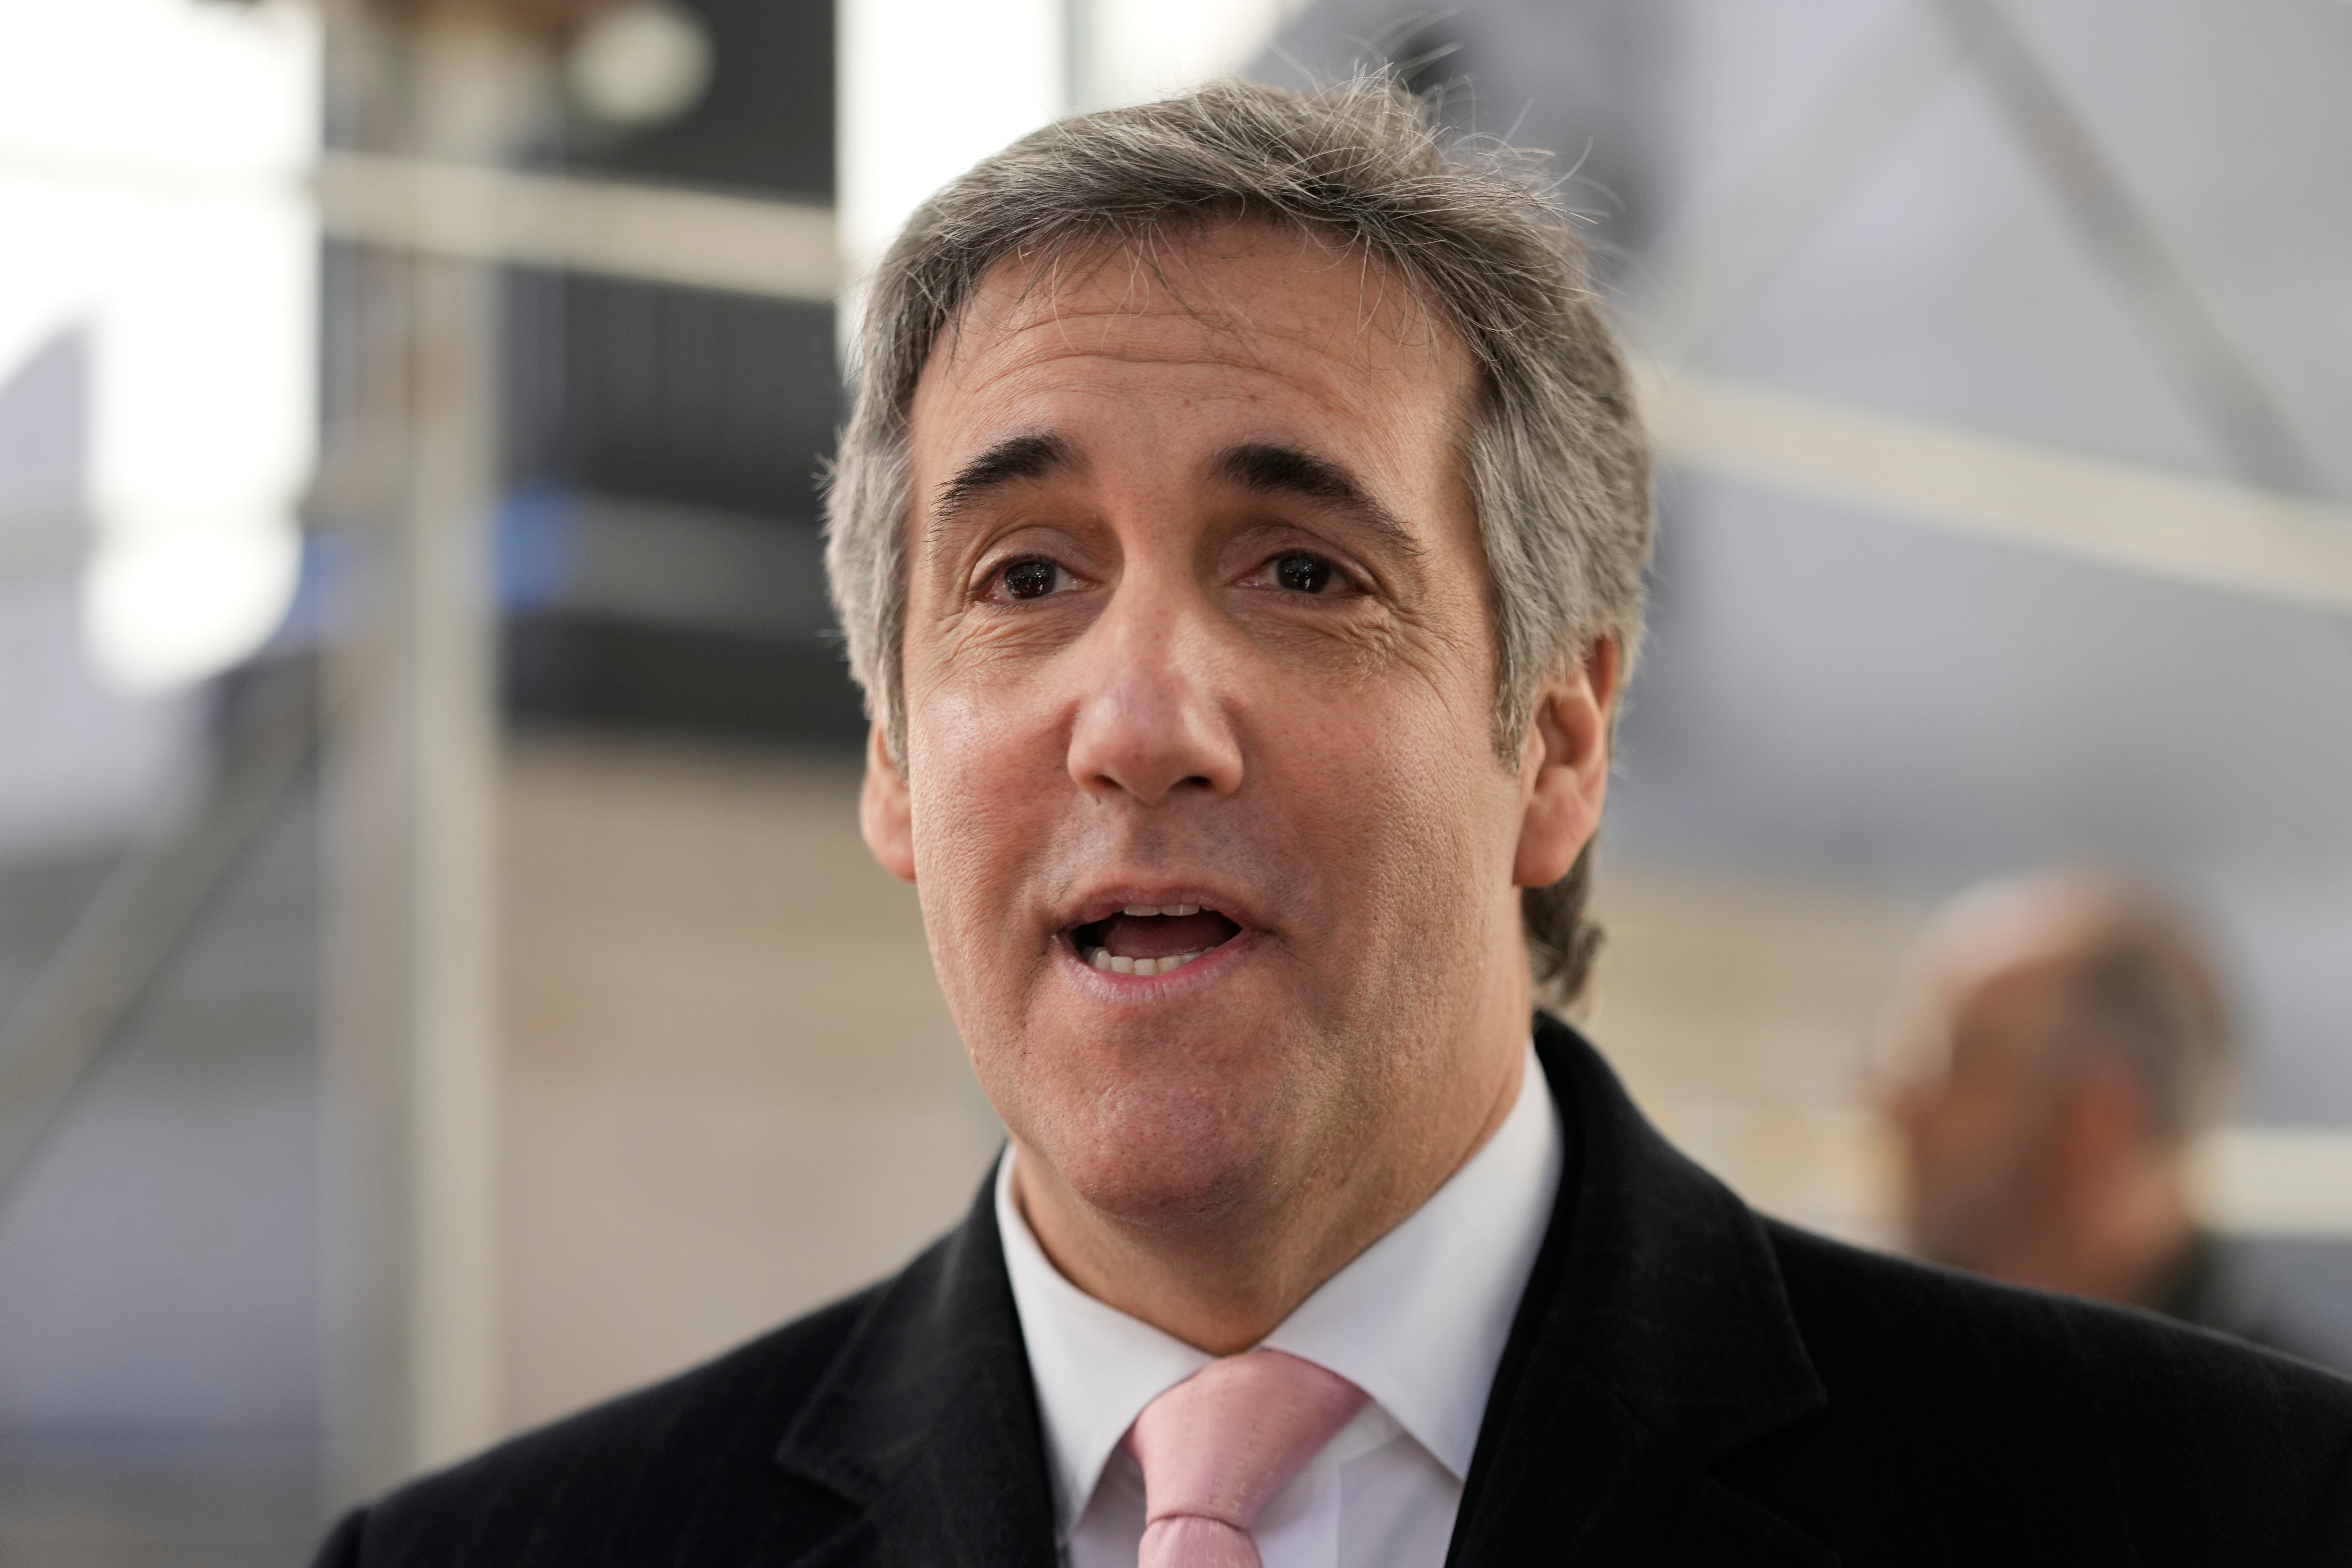 Donald Trump’s former attorney Michael Cohen said he may not testify agaisnt the former president if his aggressive rhetoric isn’t kept in check